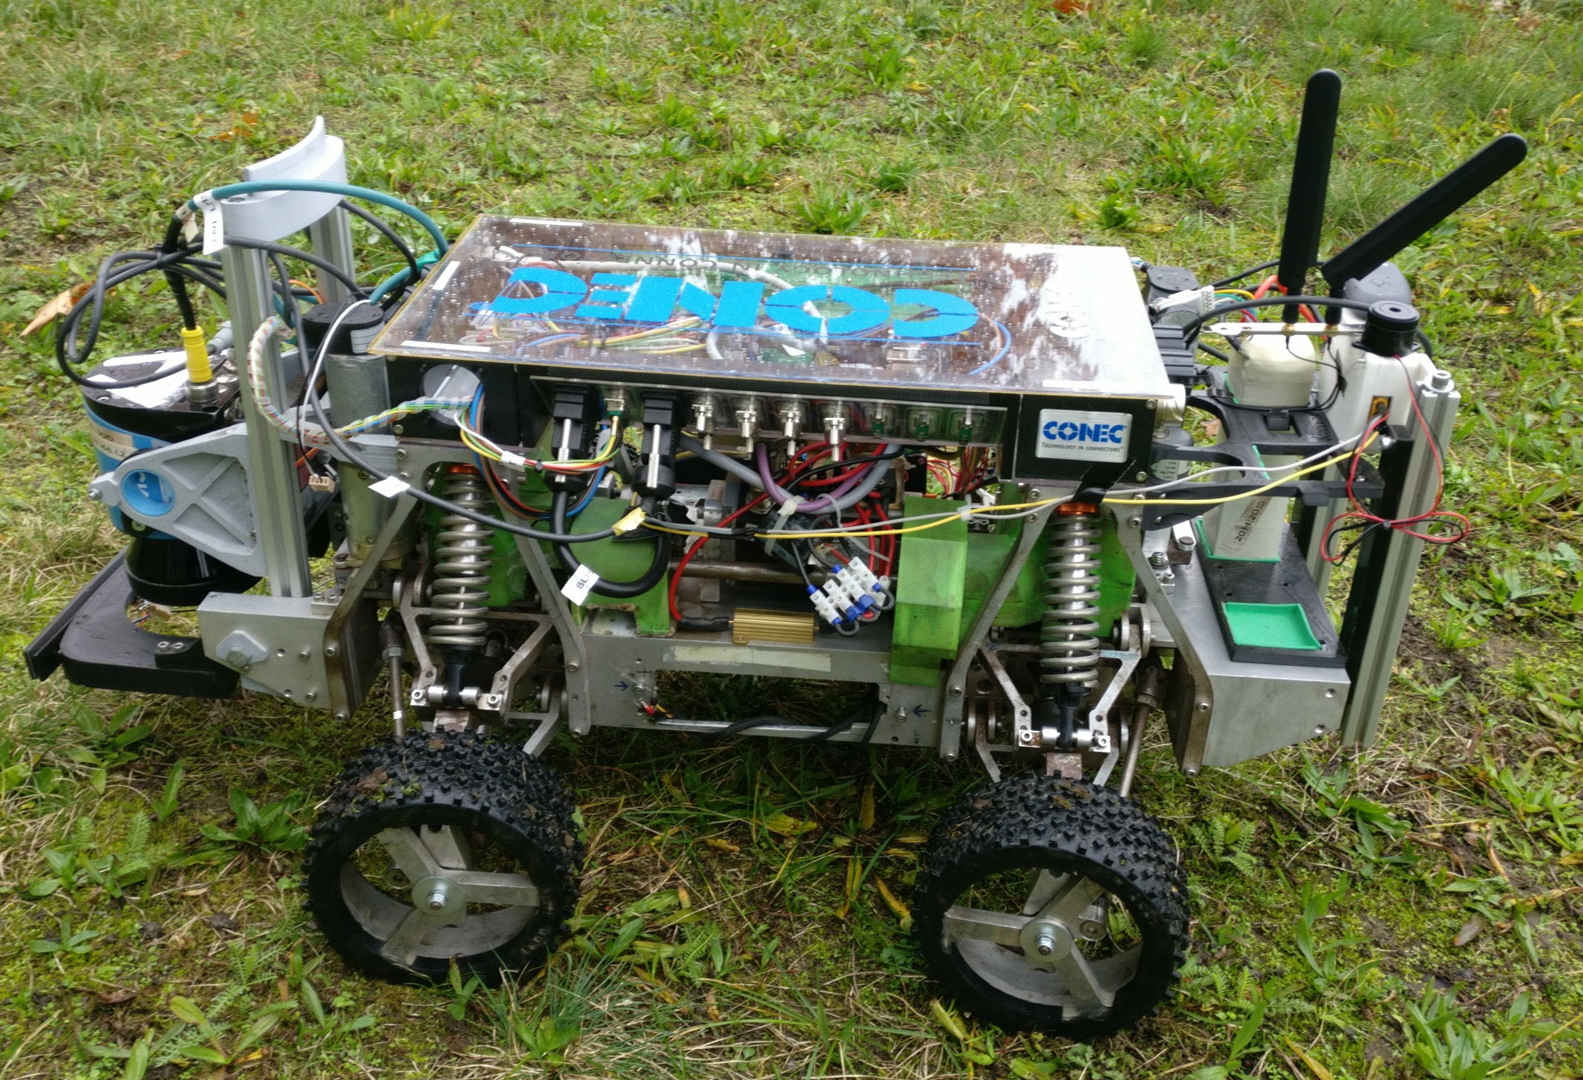 CONEC supports field robot project